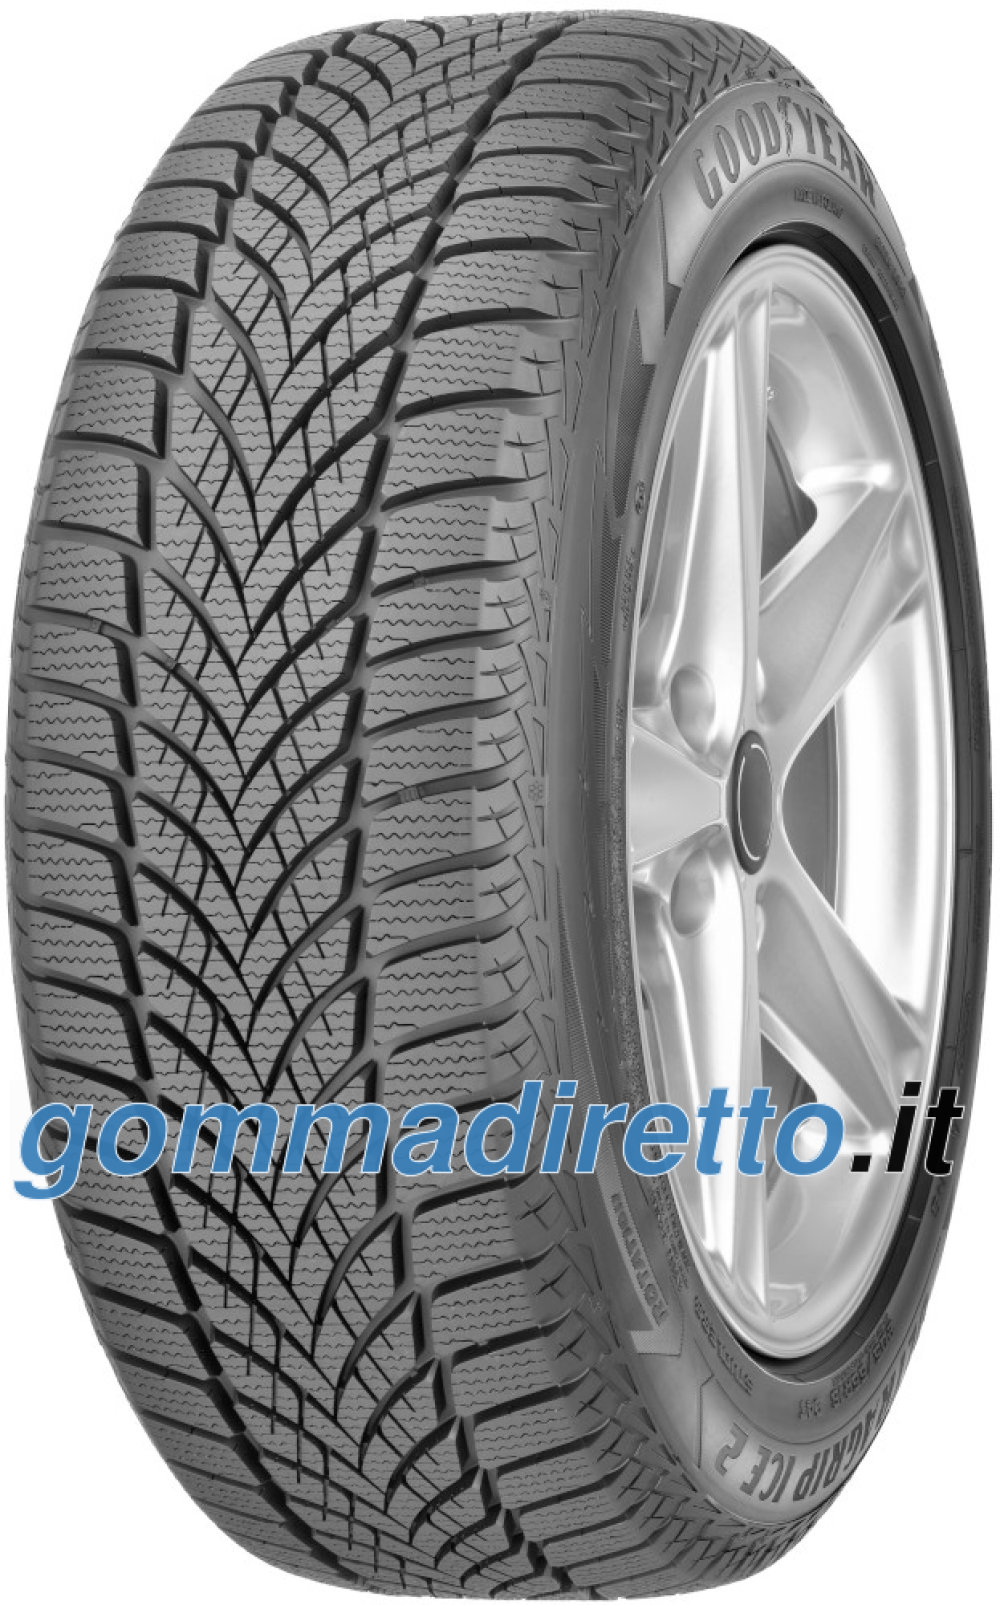 Image of Goodyear UltraGrip Ice 2 ( 245/40 R18 97T XL EVR, Nordic compound )